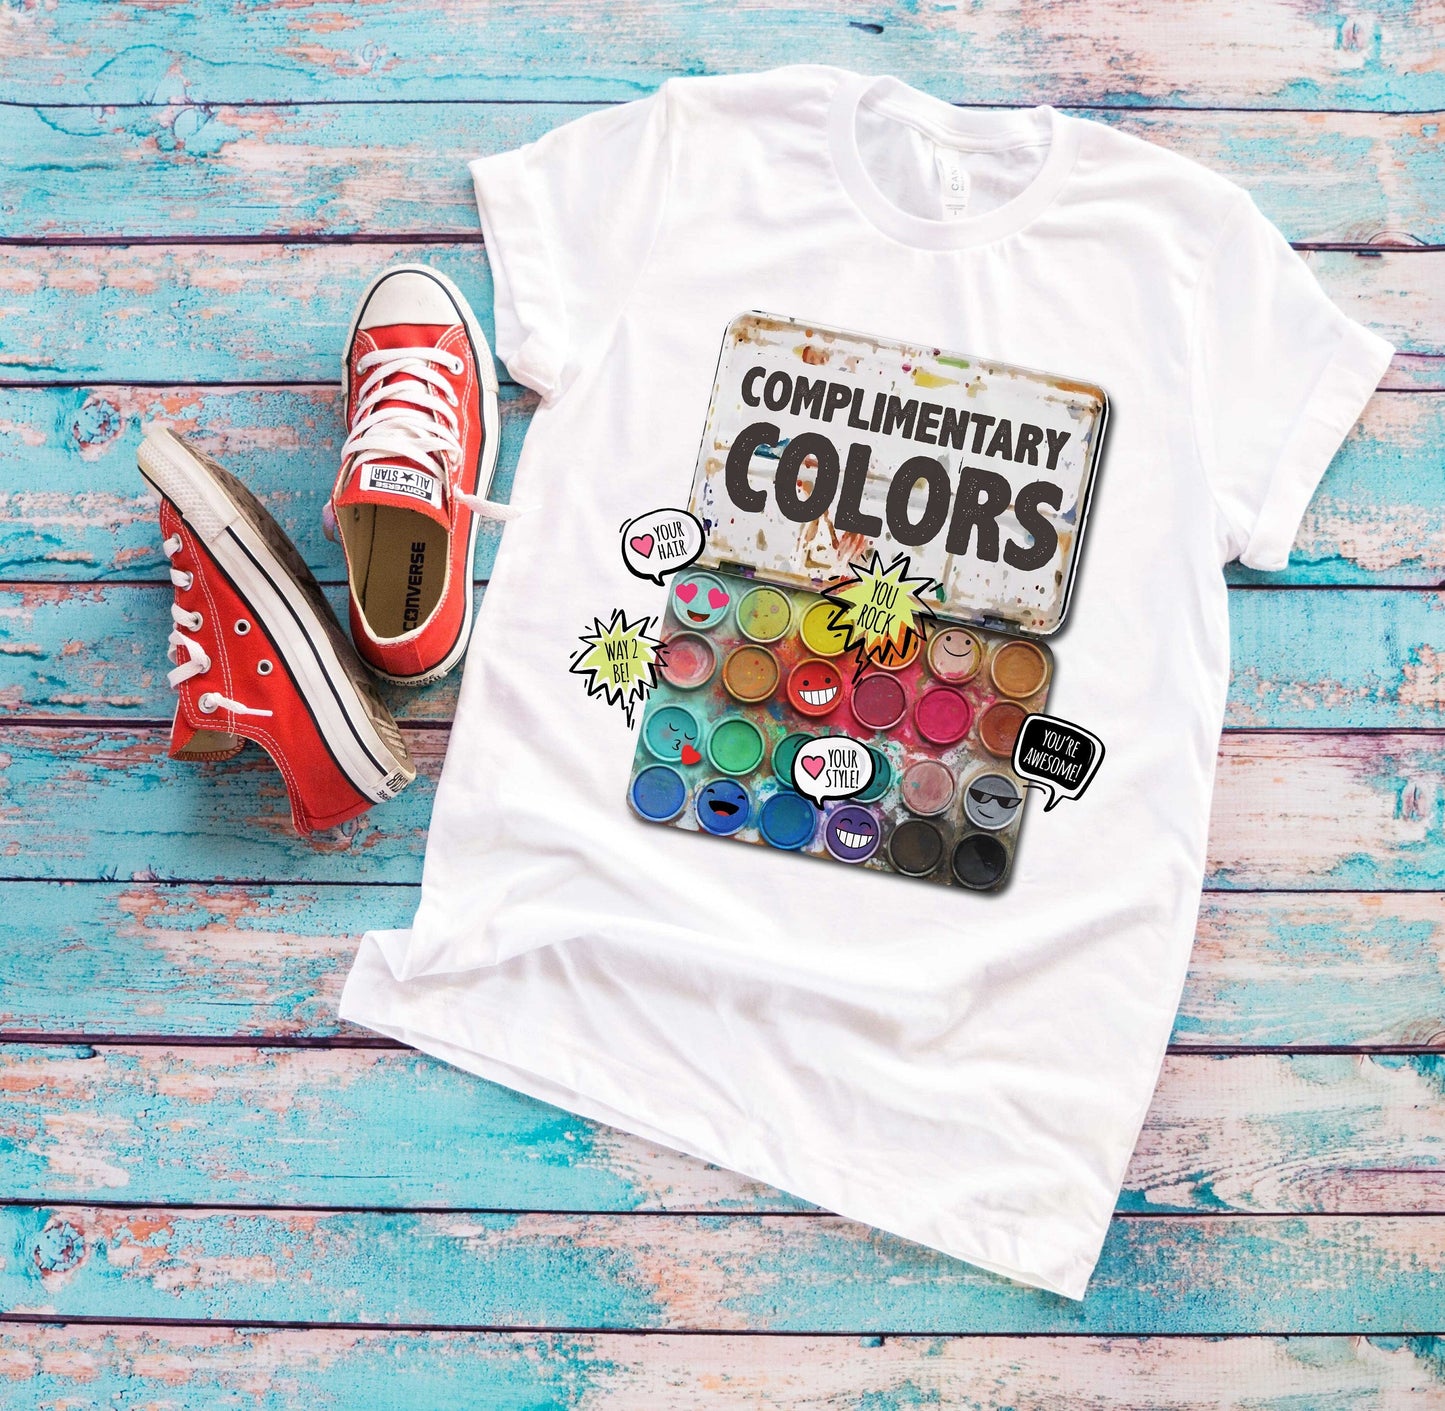 Funny Complimentary Colors Art Watercolor Painting Ultra Soft Graphic Tee Unisex Soft Tee T-shirt for Women or Men